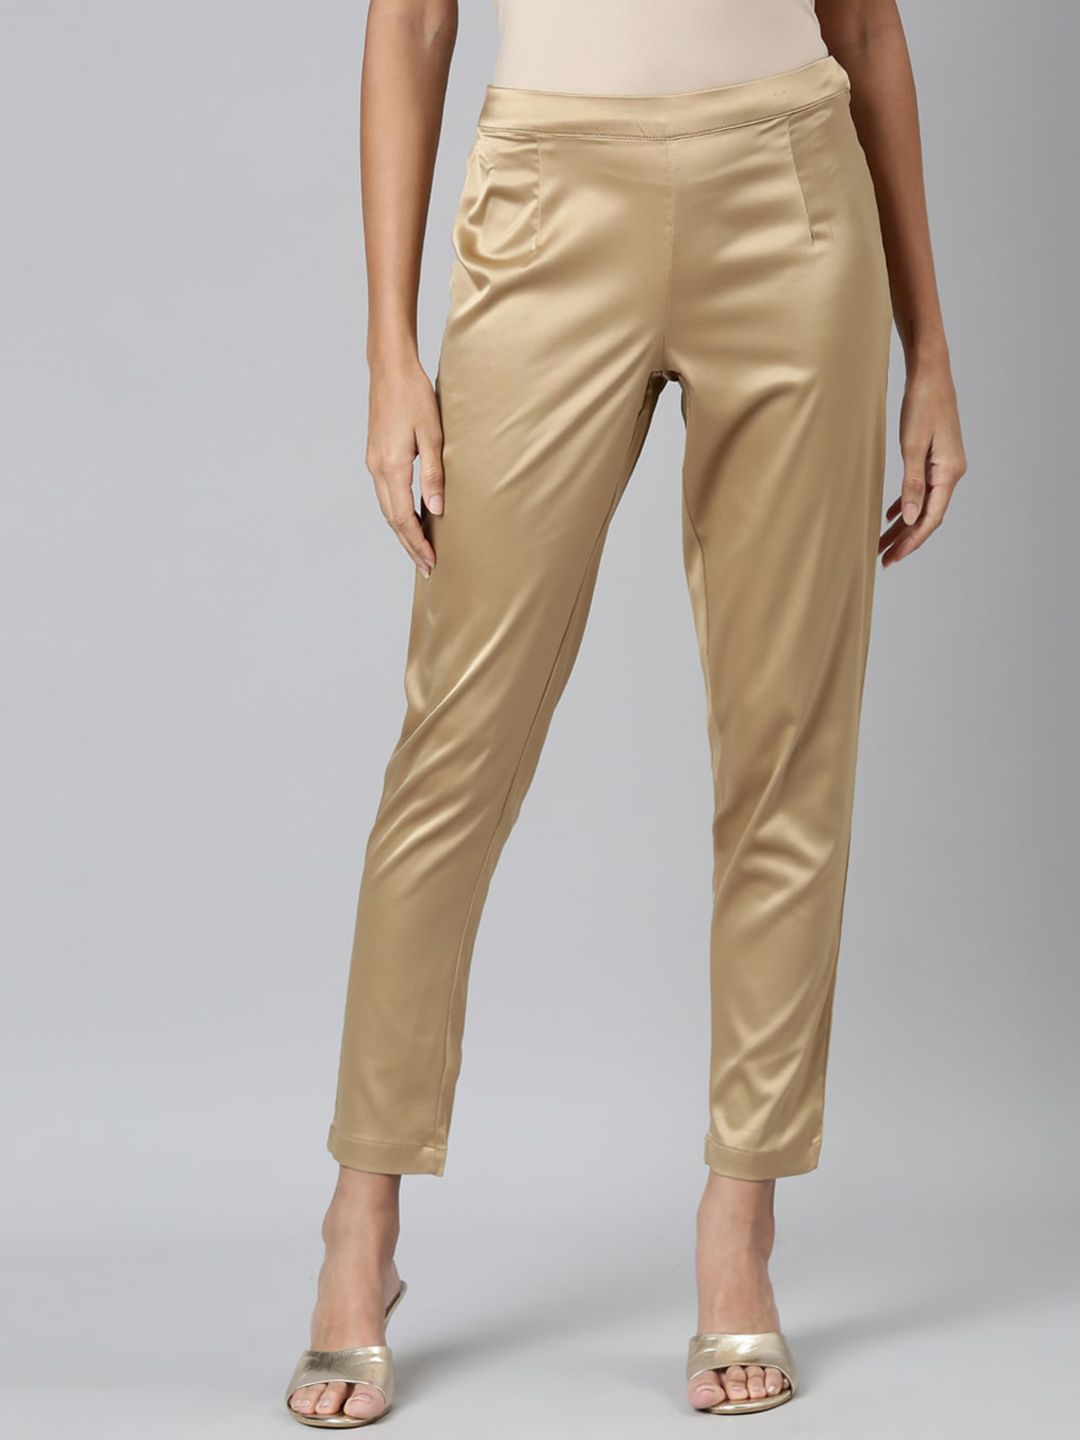 Go Colors Women Slim Fit Trousers Price in India